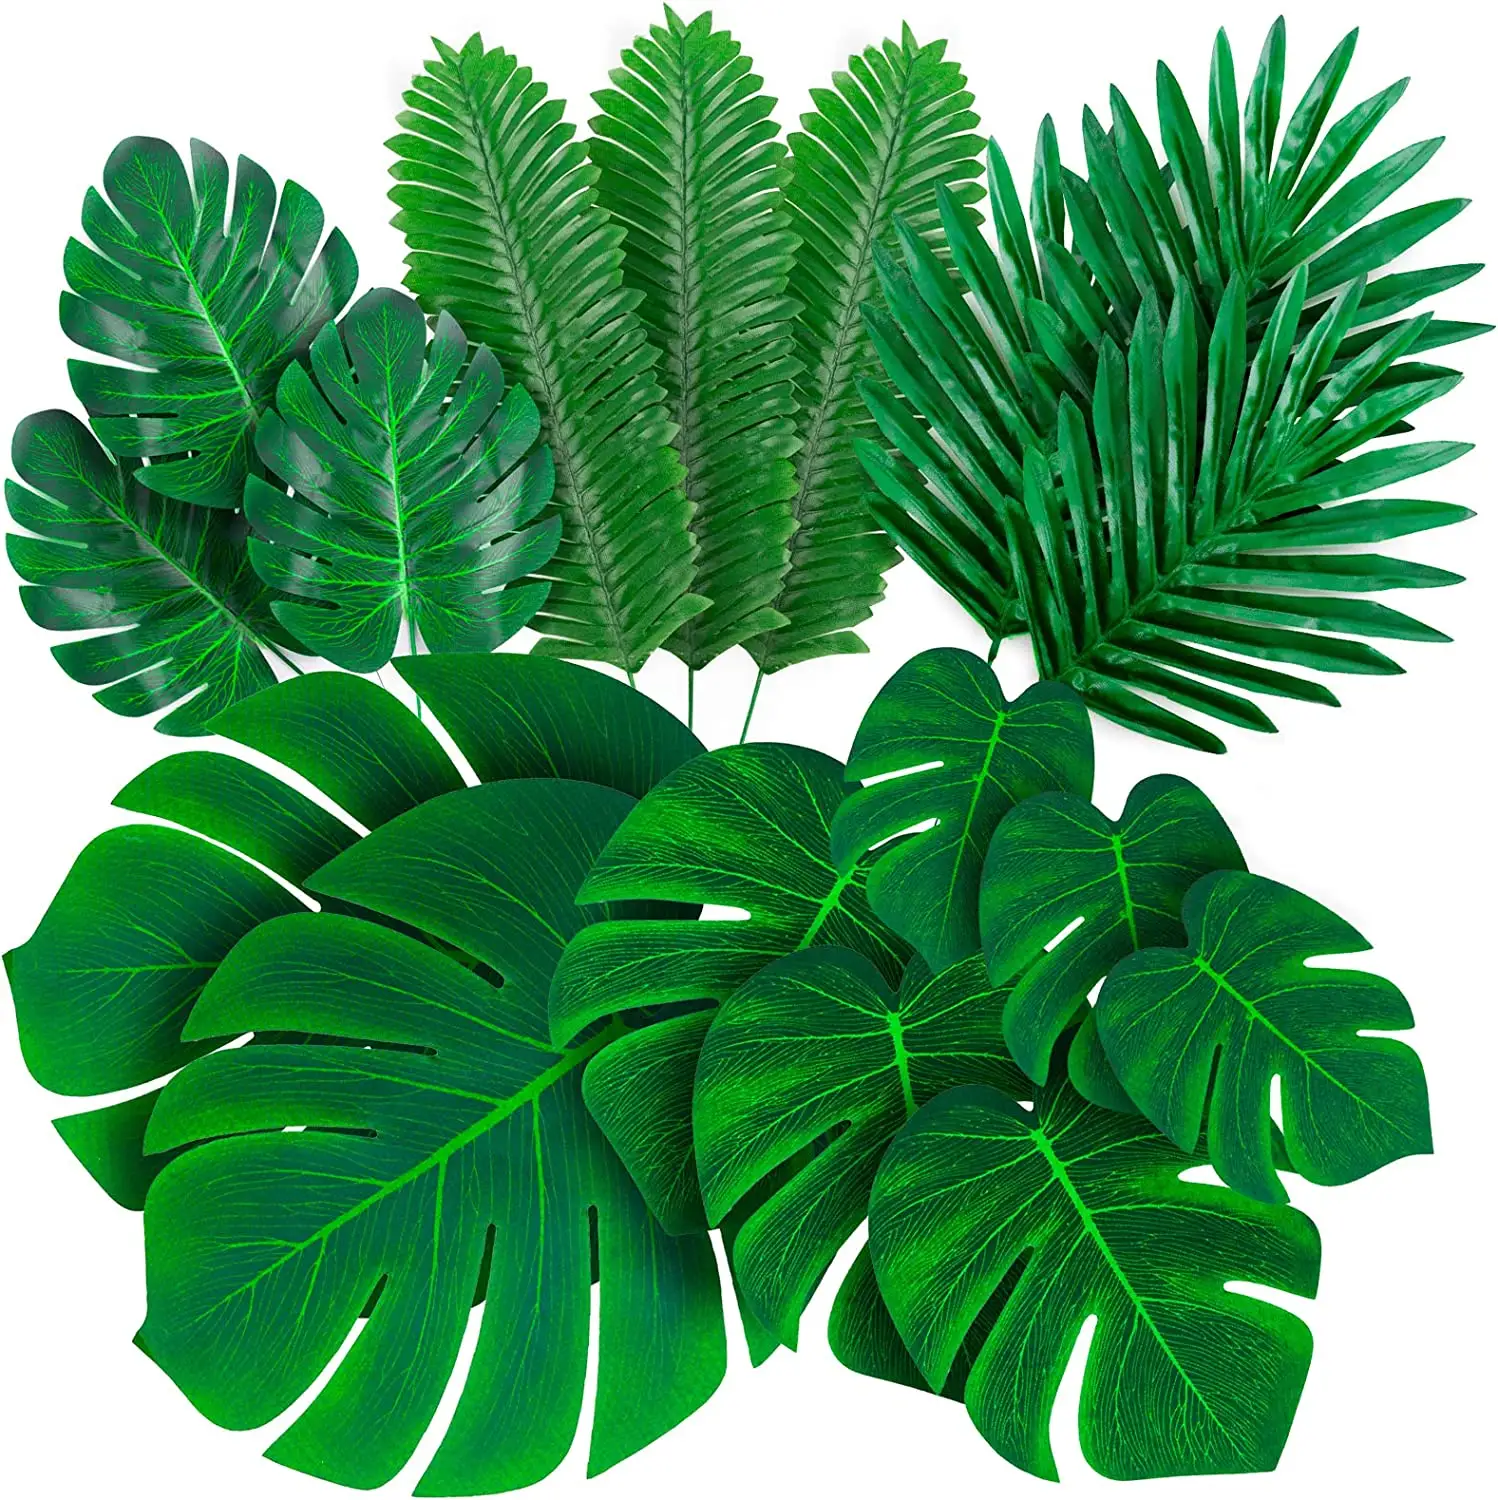 Palm Leaves Artificial Tropical Monstra-84Pcs 6 Kinds Large Small Green Fake Palm Leaf with Stems for Safari Jungle Hawaiian L